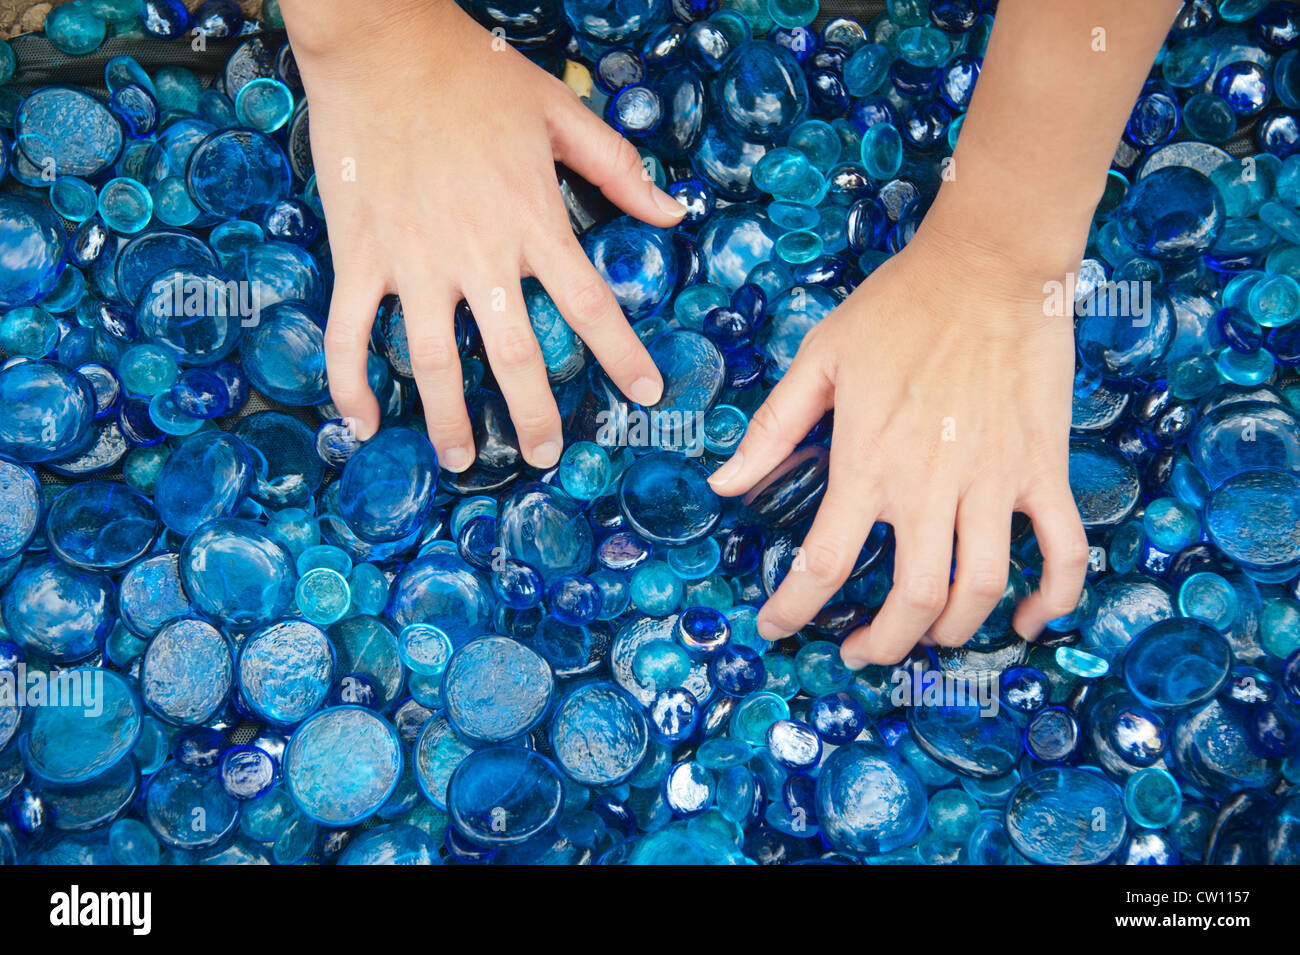 Hands sifting through sea glass Stock Photo